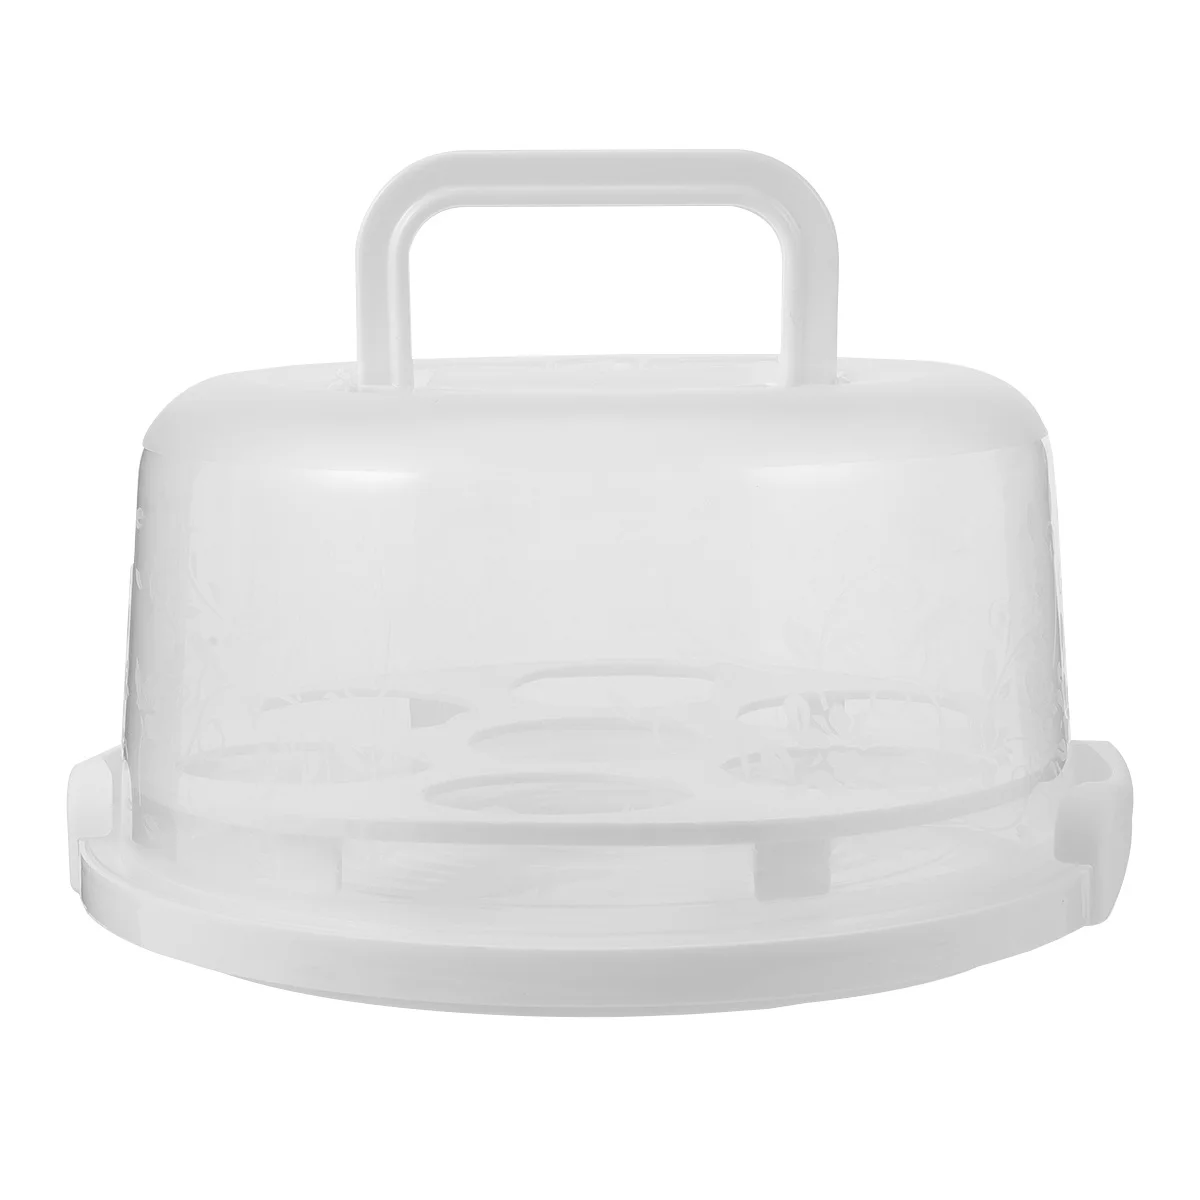 

White Clear Cake Dome Boxes Cupcake Containers Carriers Cake Boards Individual Cake Pastries Muffin Cups Case Holder Containers